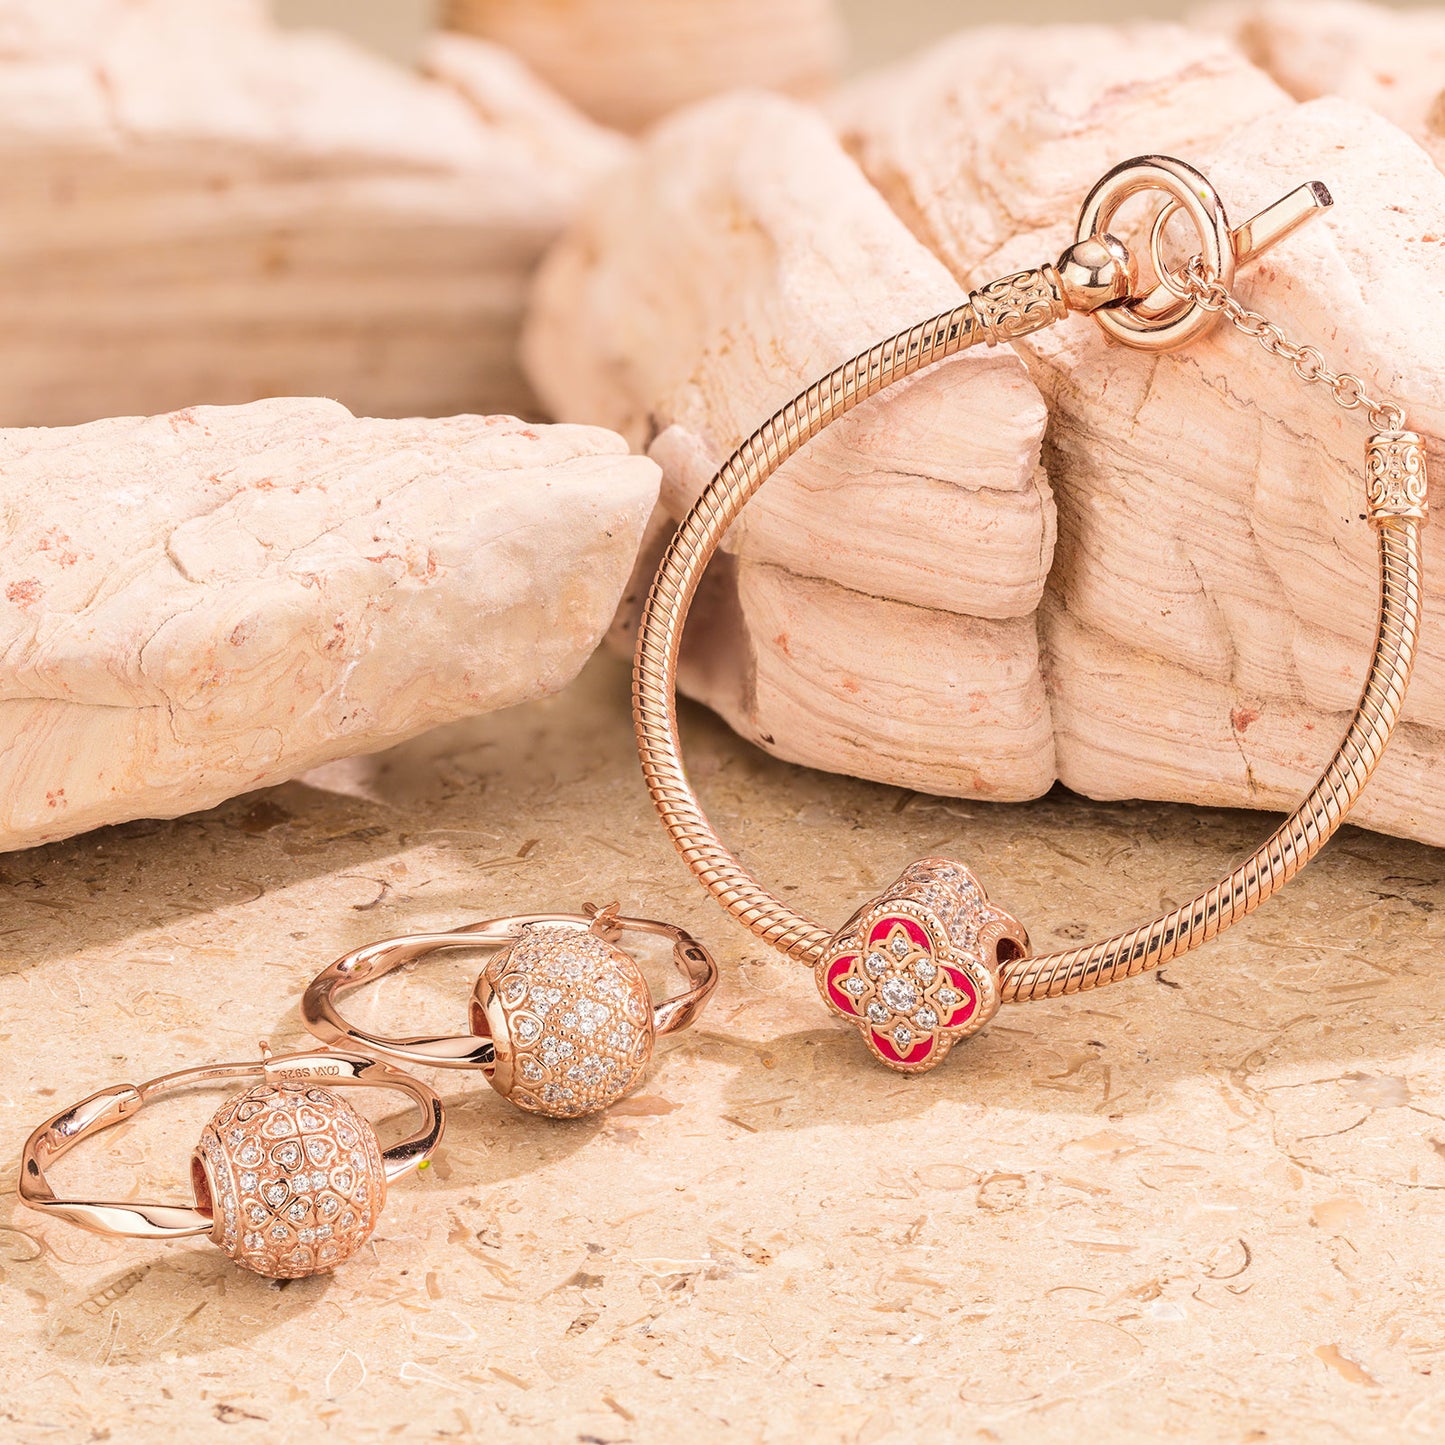 Rose Heart Tarnish-resistant Silver Charms Bracelet and Earrings Set With Enamel In Rose Gold Plated